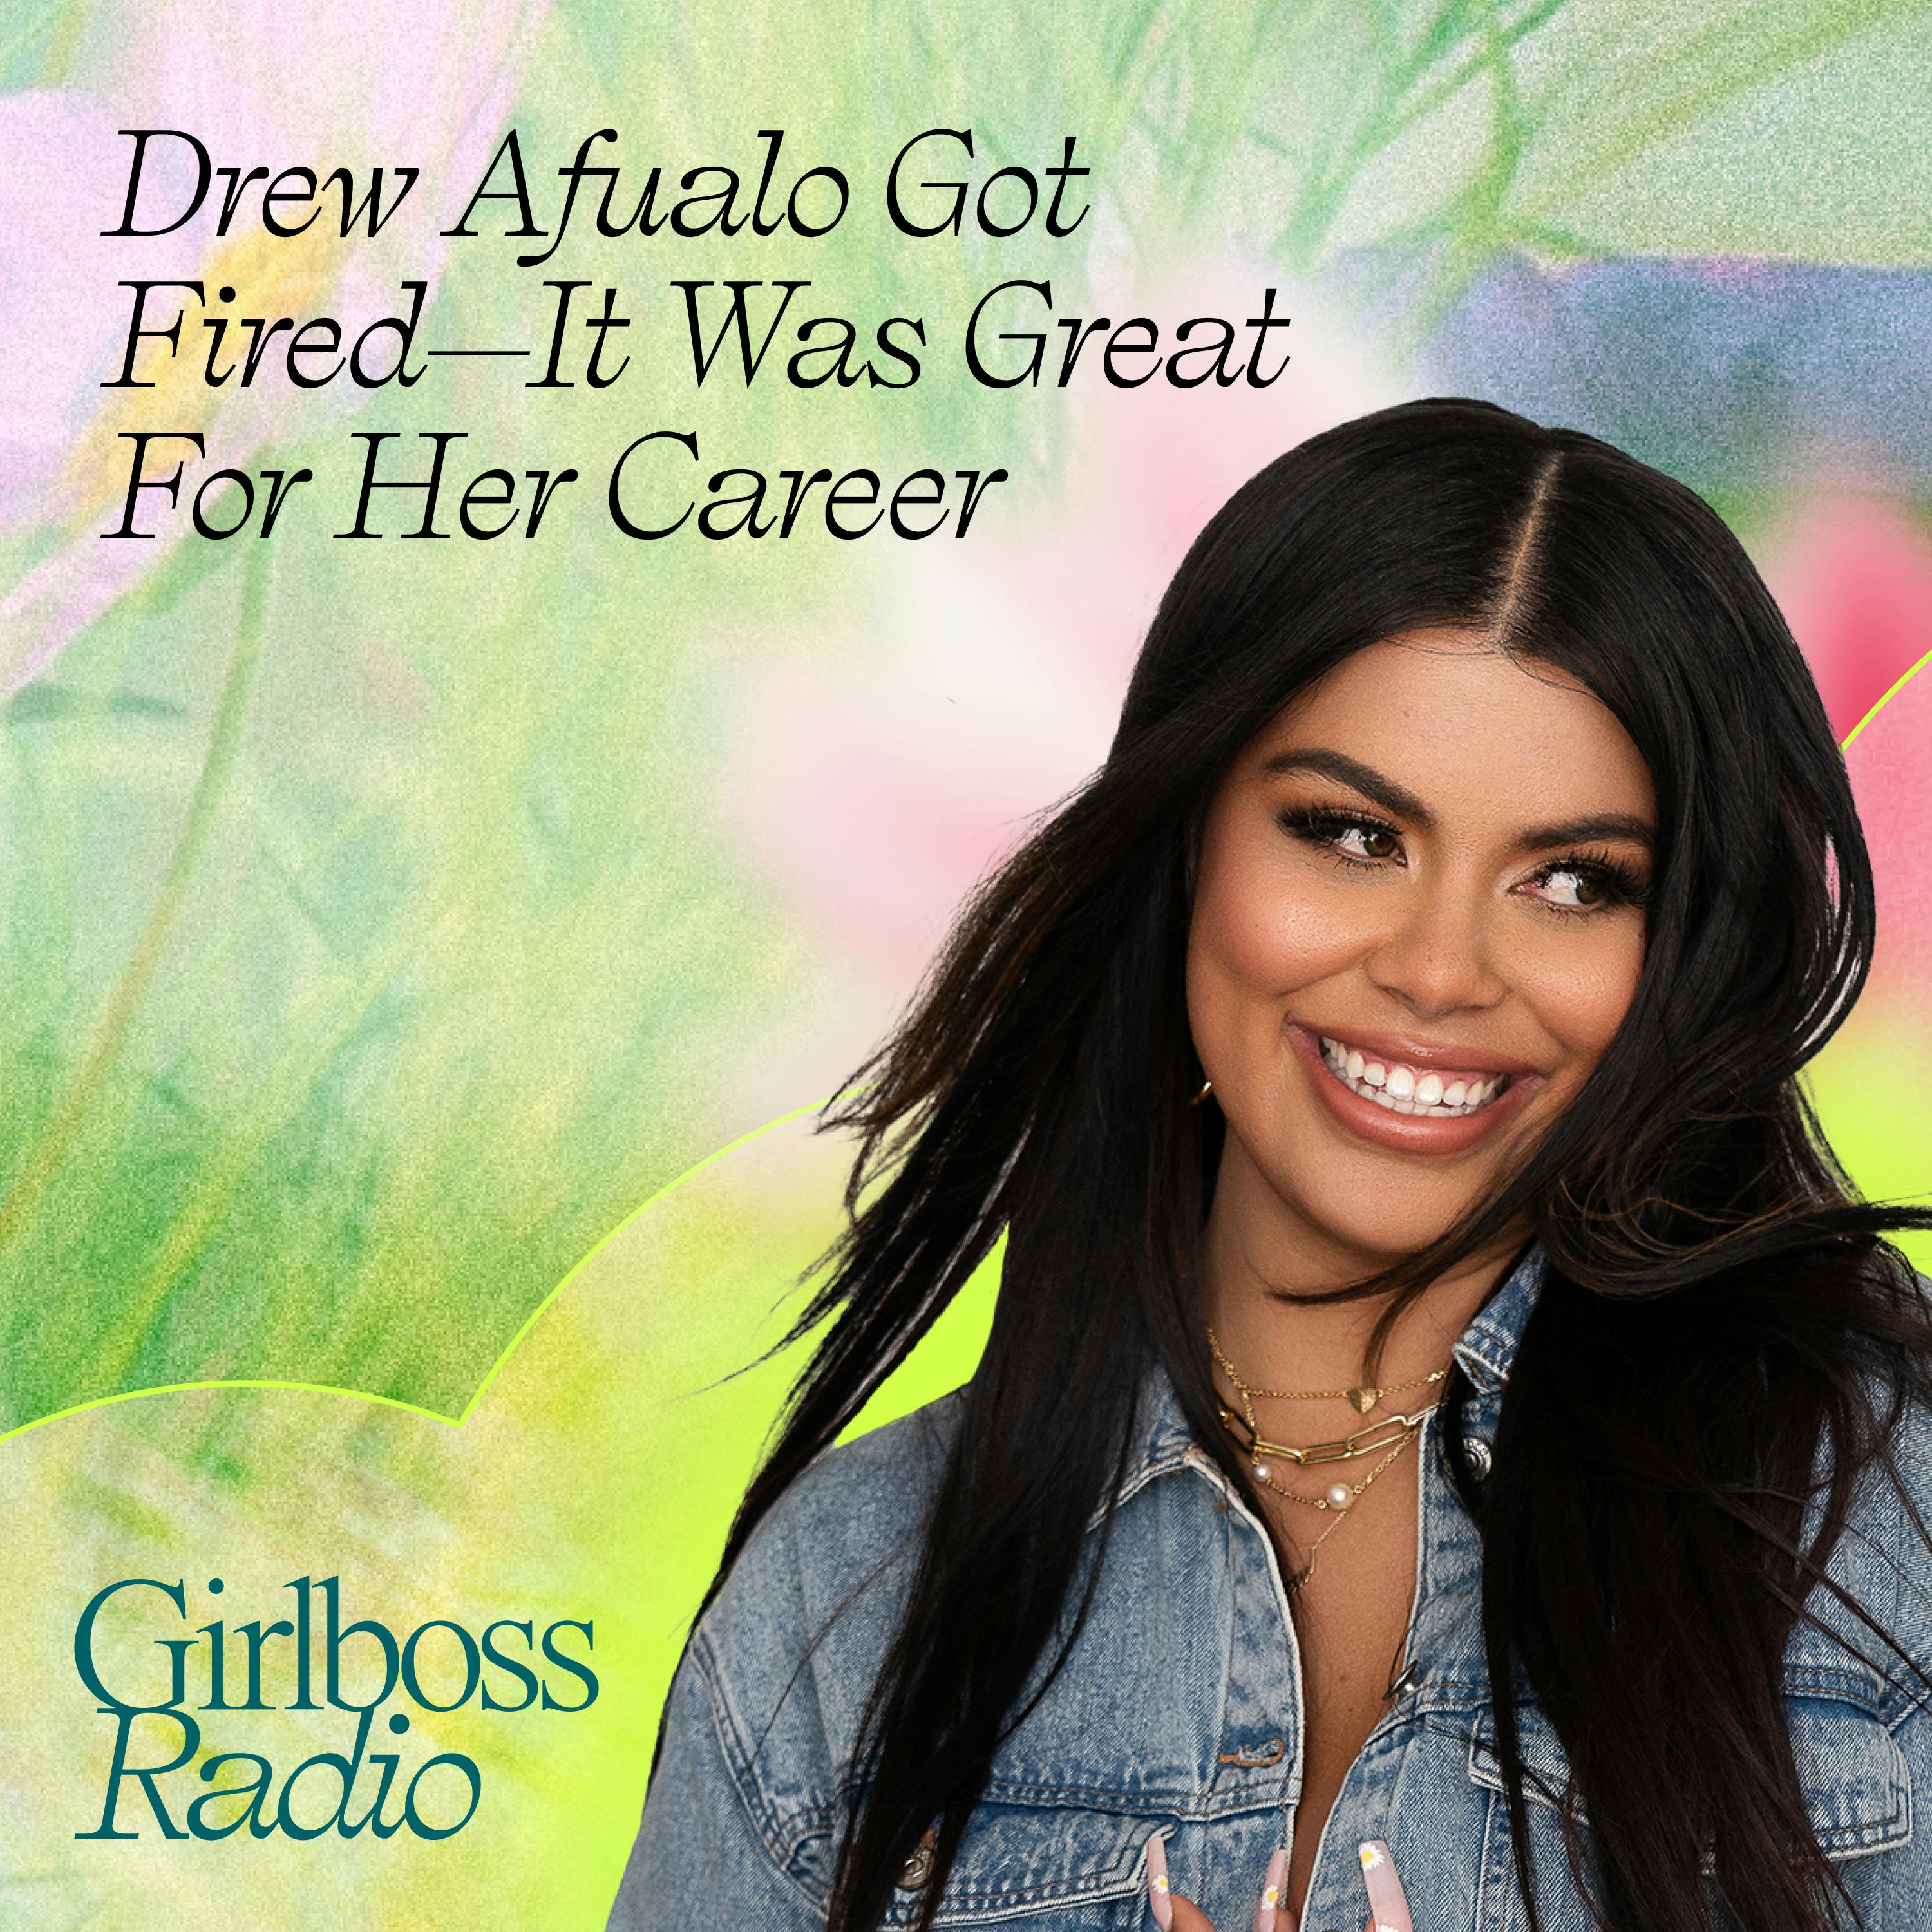 Drew Afualo Got Fired—It Was Great For Her Career